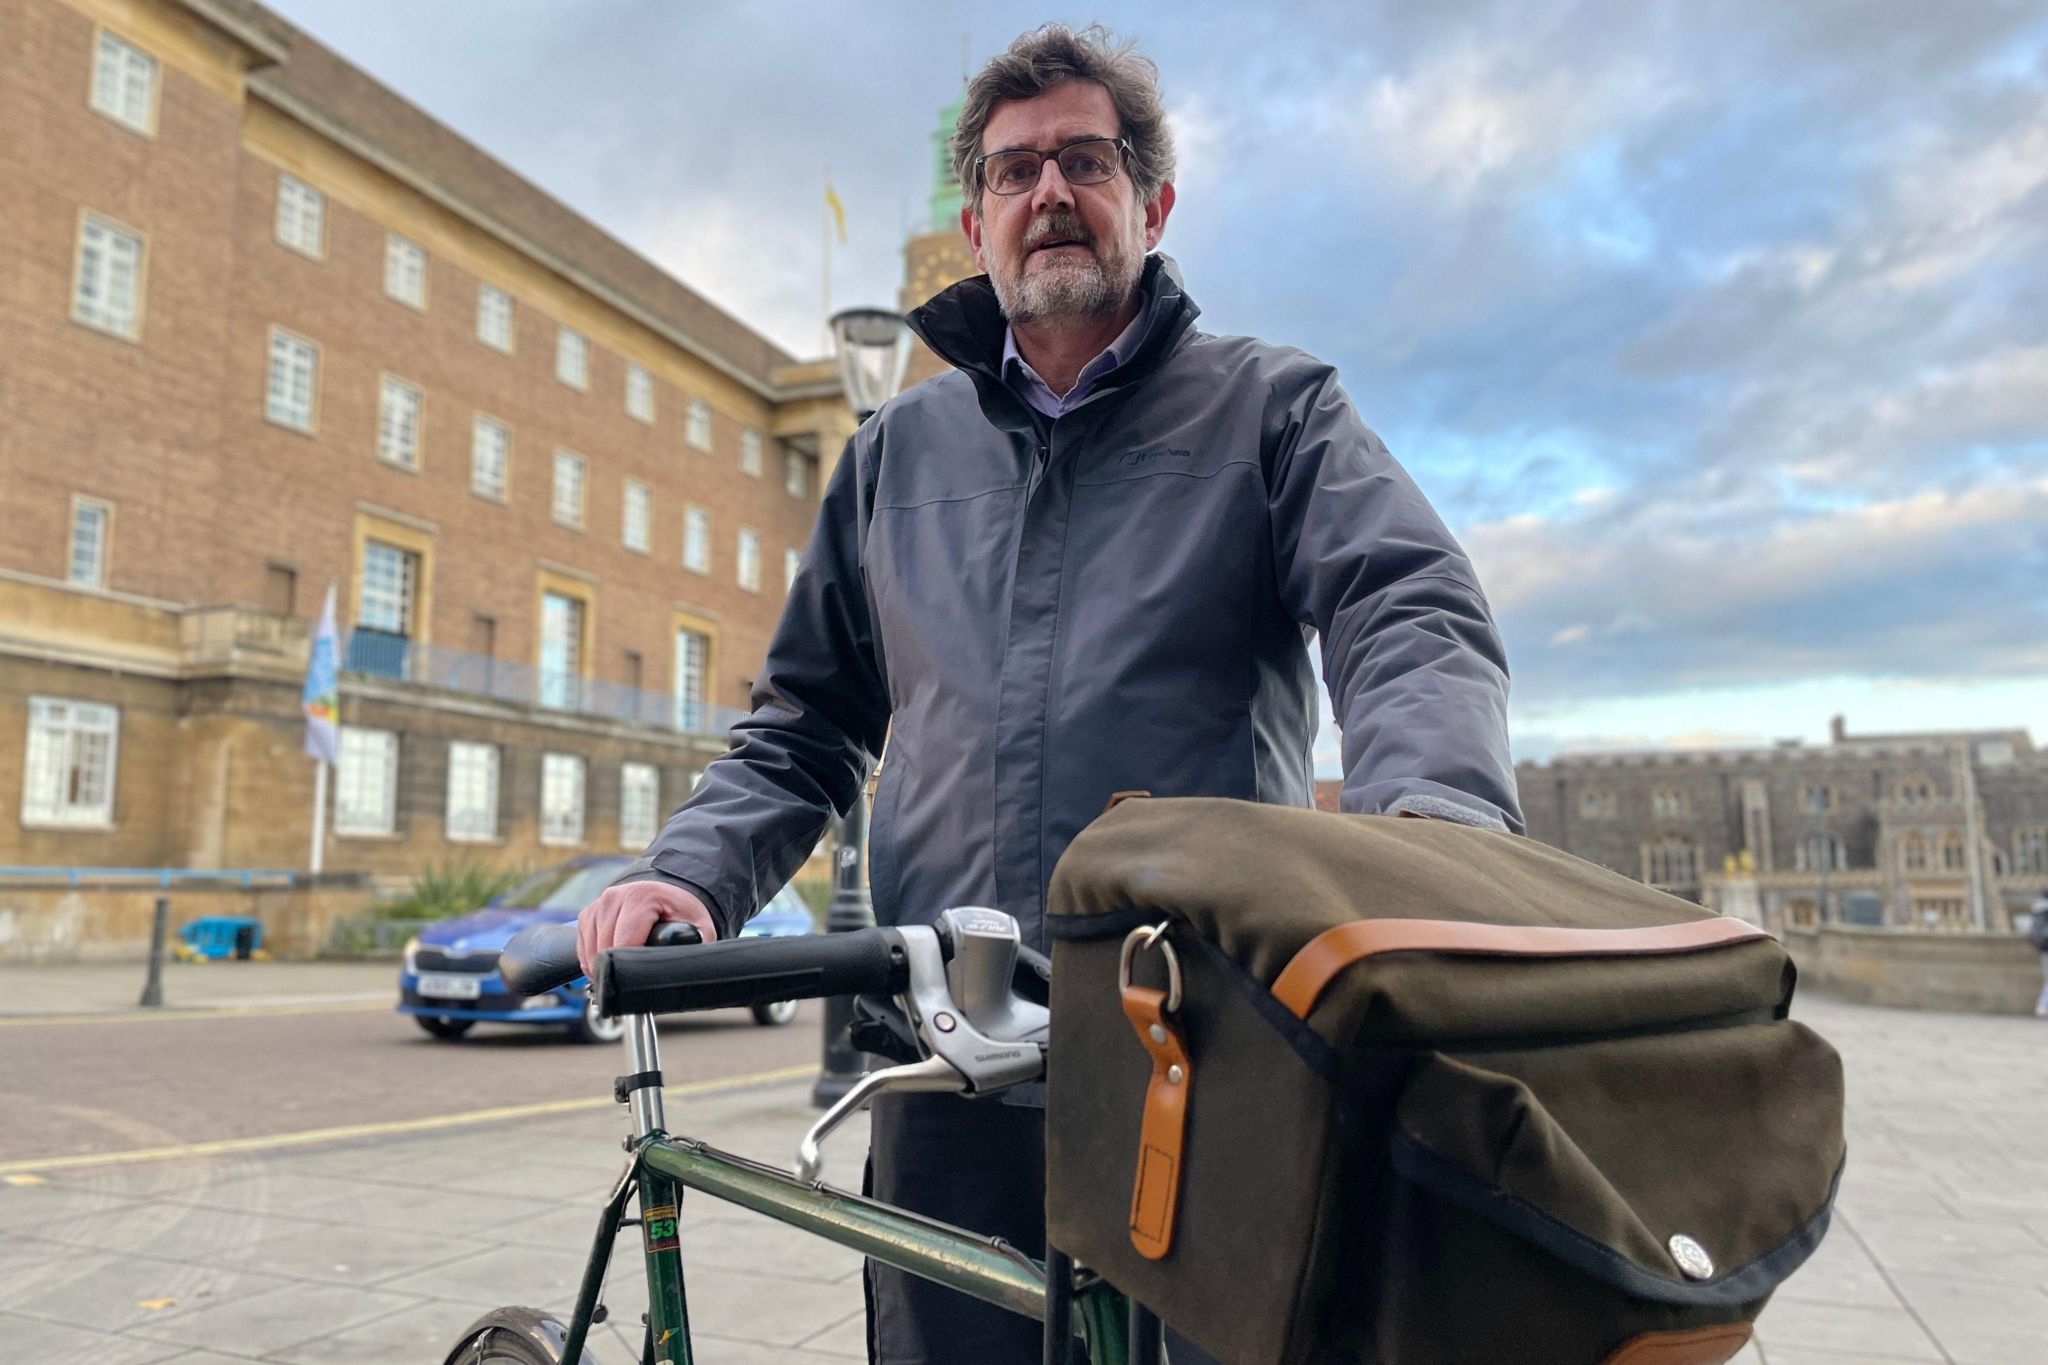 Peter Silburn, chairman of Norwich Cycling Campaign